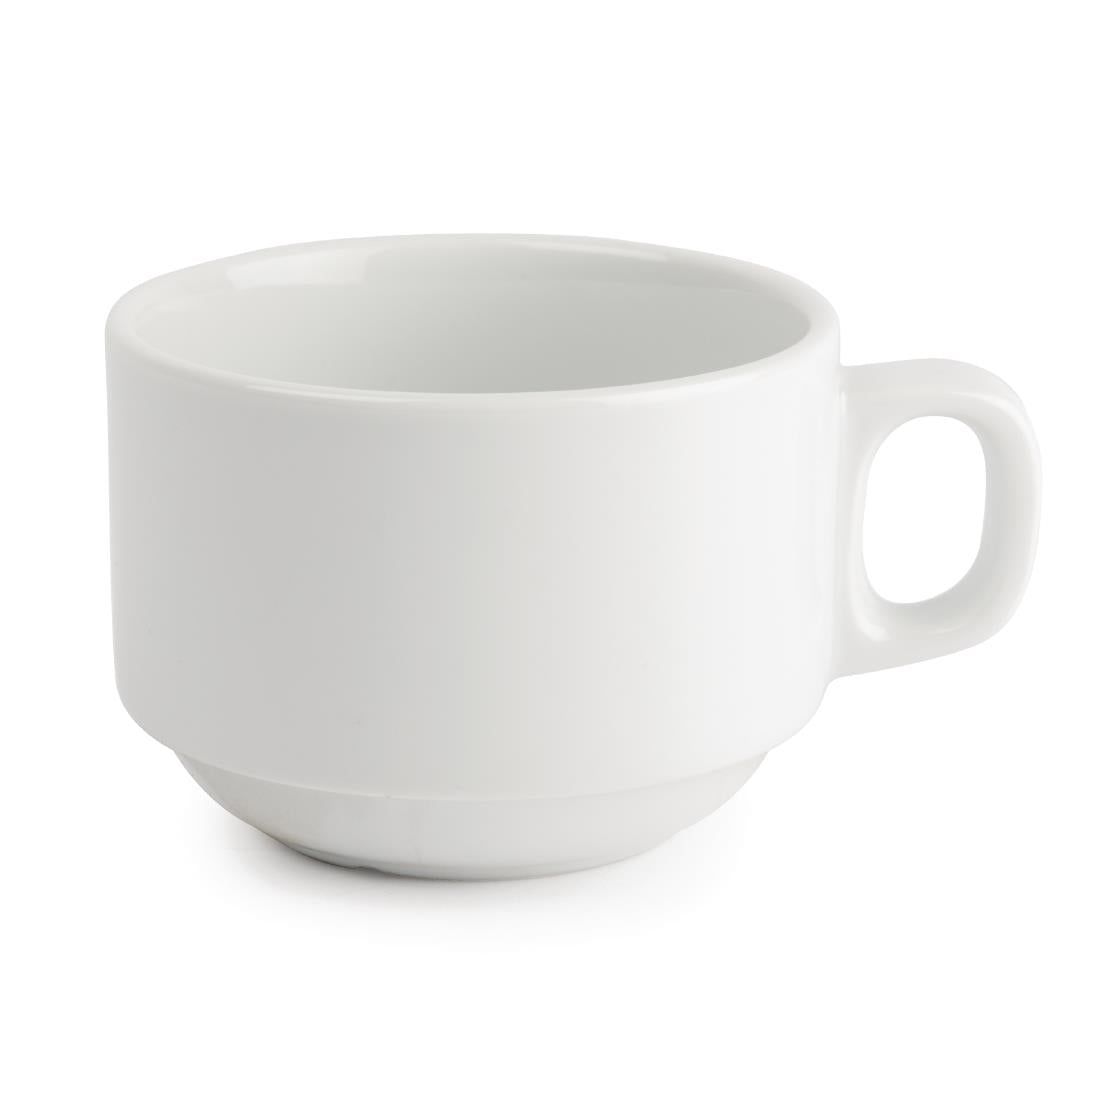 CG029 Royal Porcelain Classic White Stackable Tea Cups 200ml (Pack of 12)